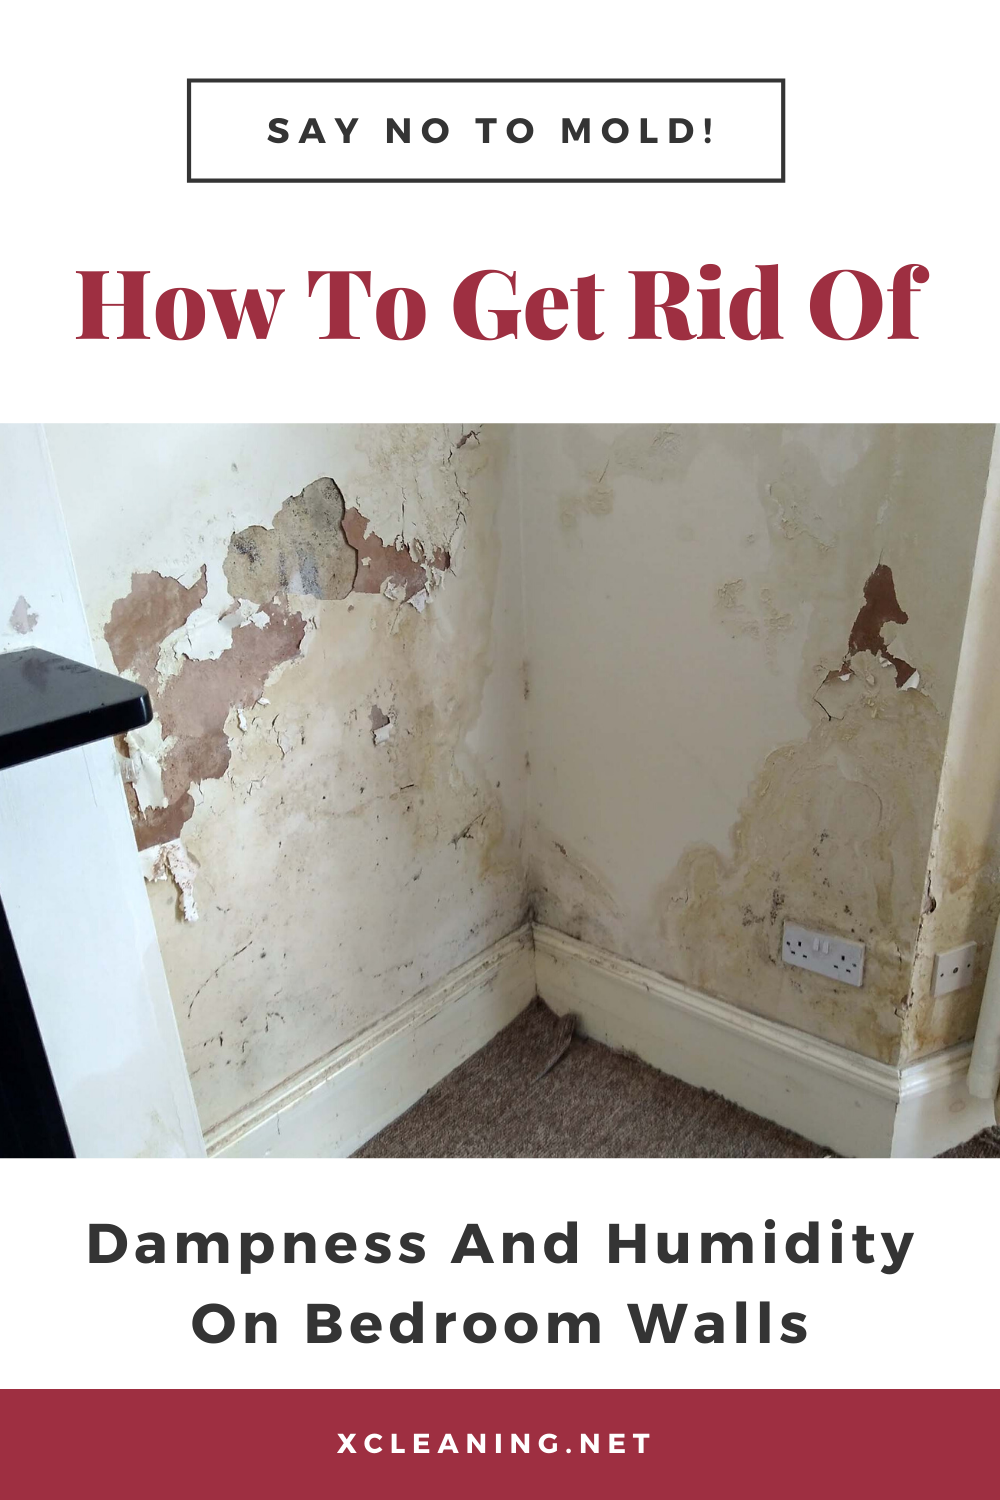 Say No To Mold! How To Get Rid Of Dampness And Humidity On